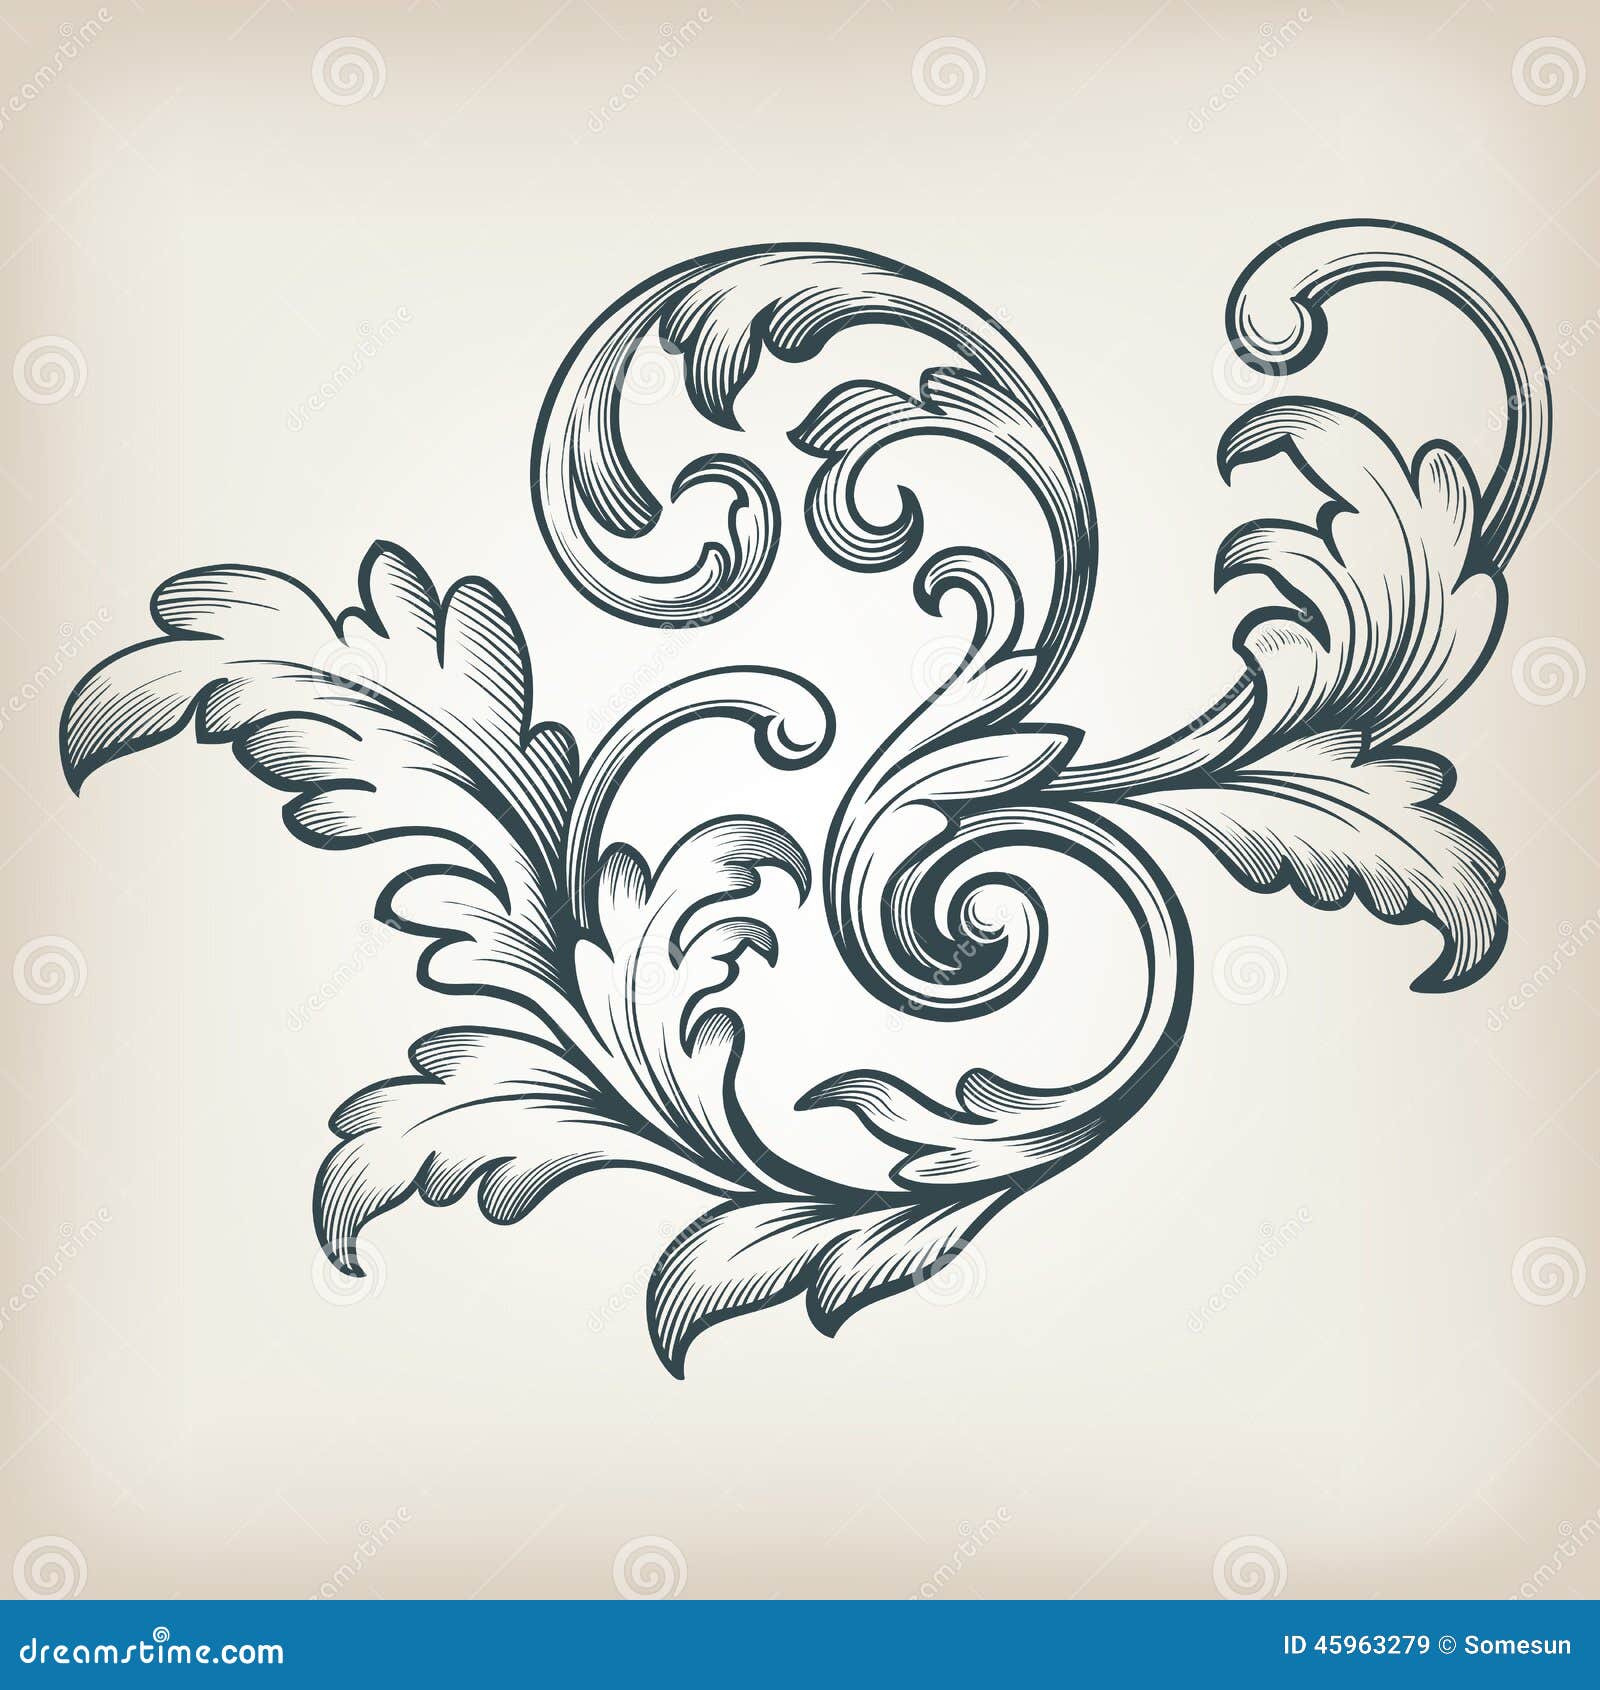 Artwork Acanthus Tattoo Design Clothing Stock Vector Royalty Free  1271180206  Shutterstock